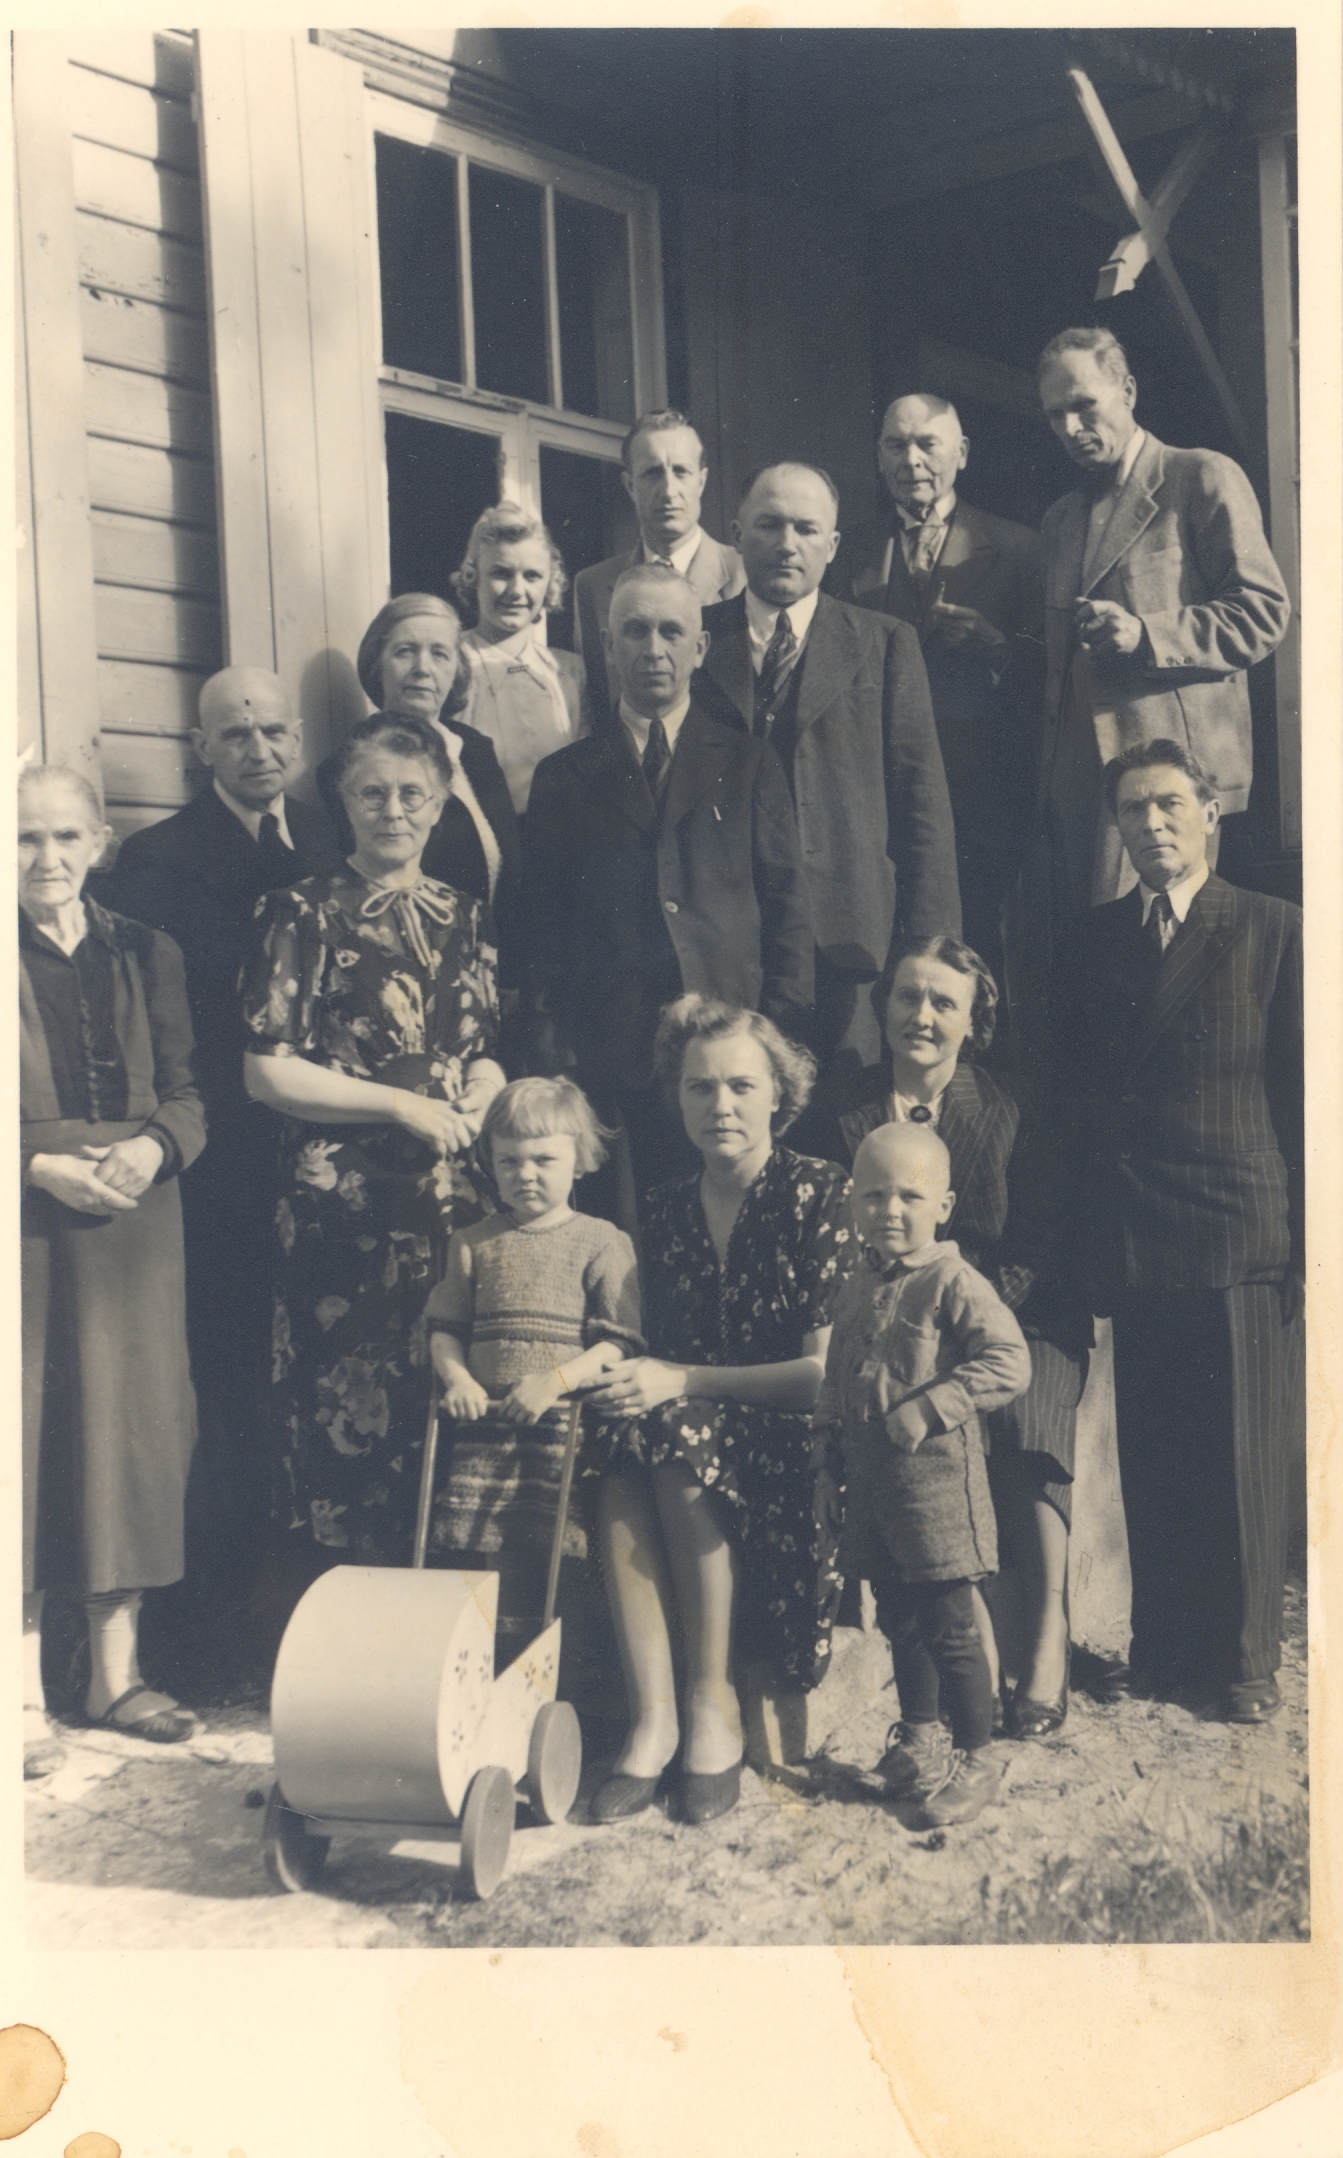 A. Adson, Marie Under, Johannes Aavik's wife, etc. 1. VI 1944